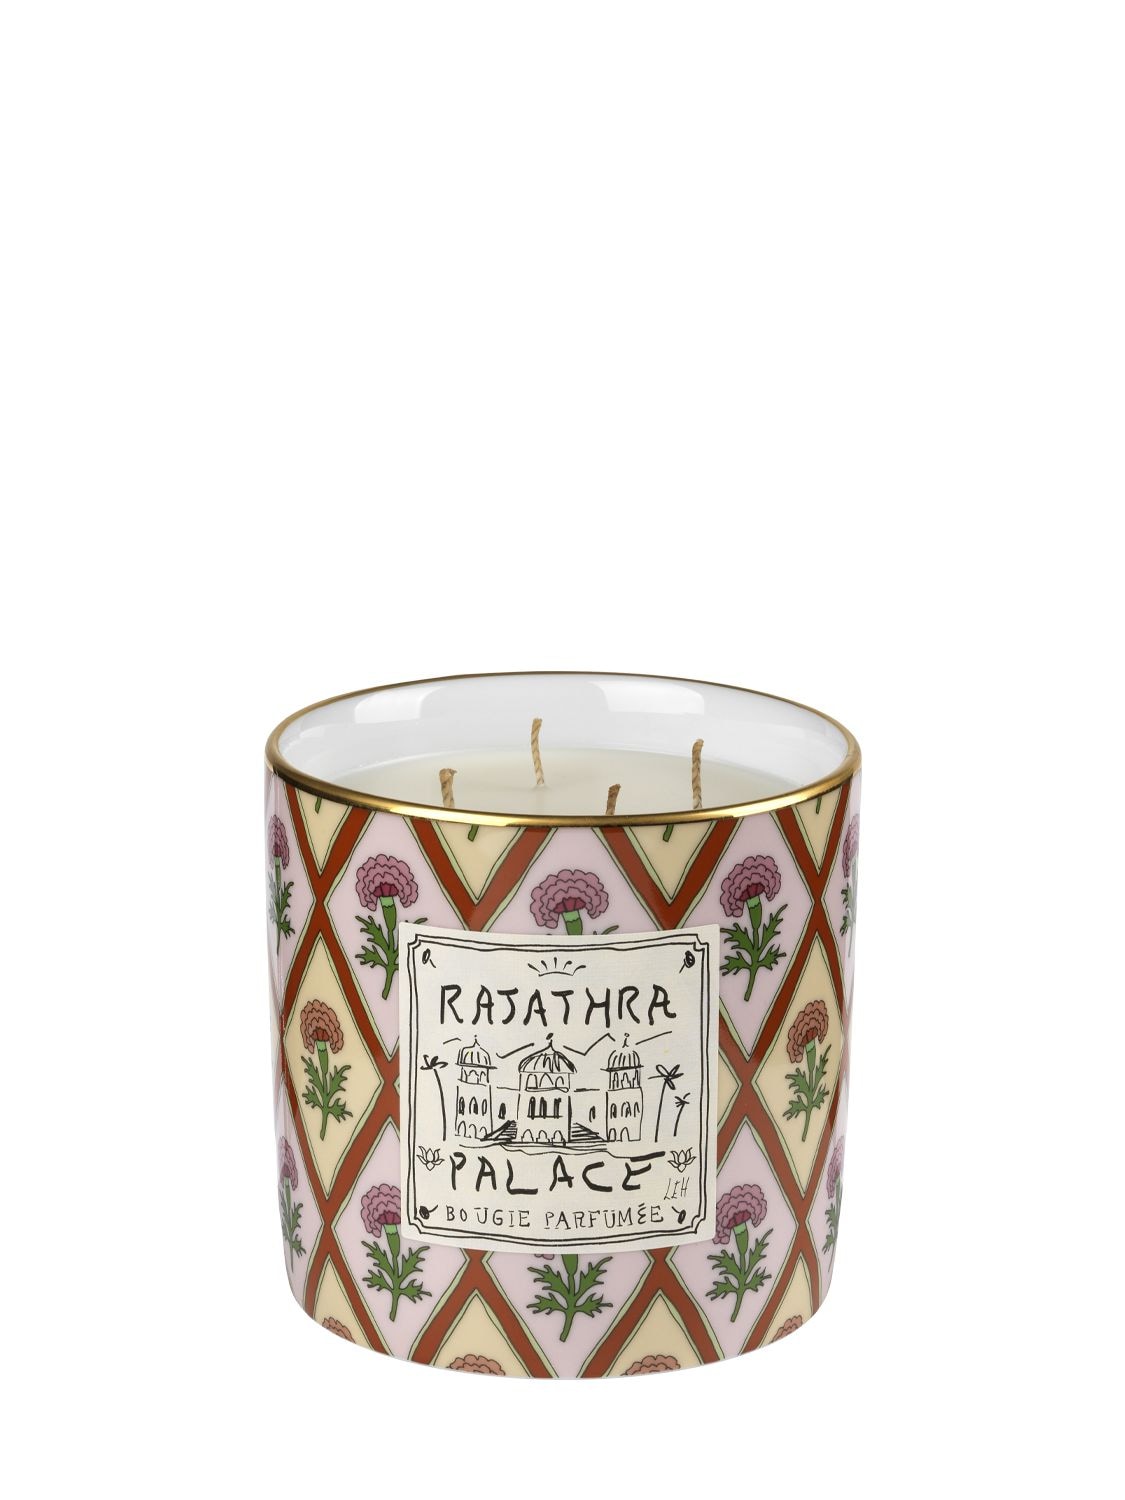 Image of Rajathra Palace Large Scented Candle